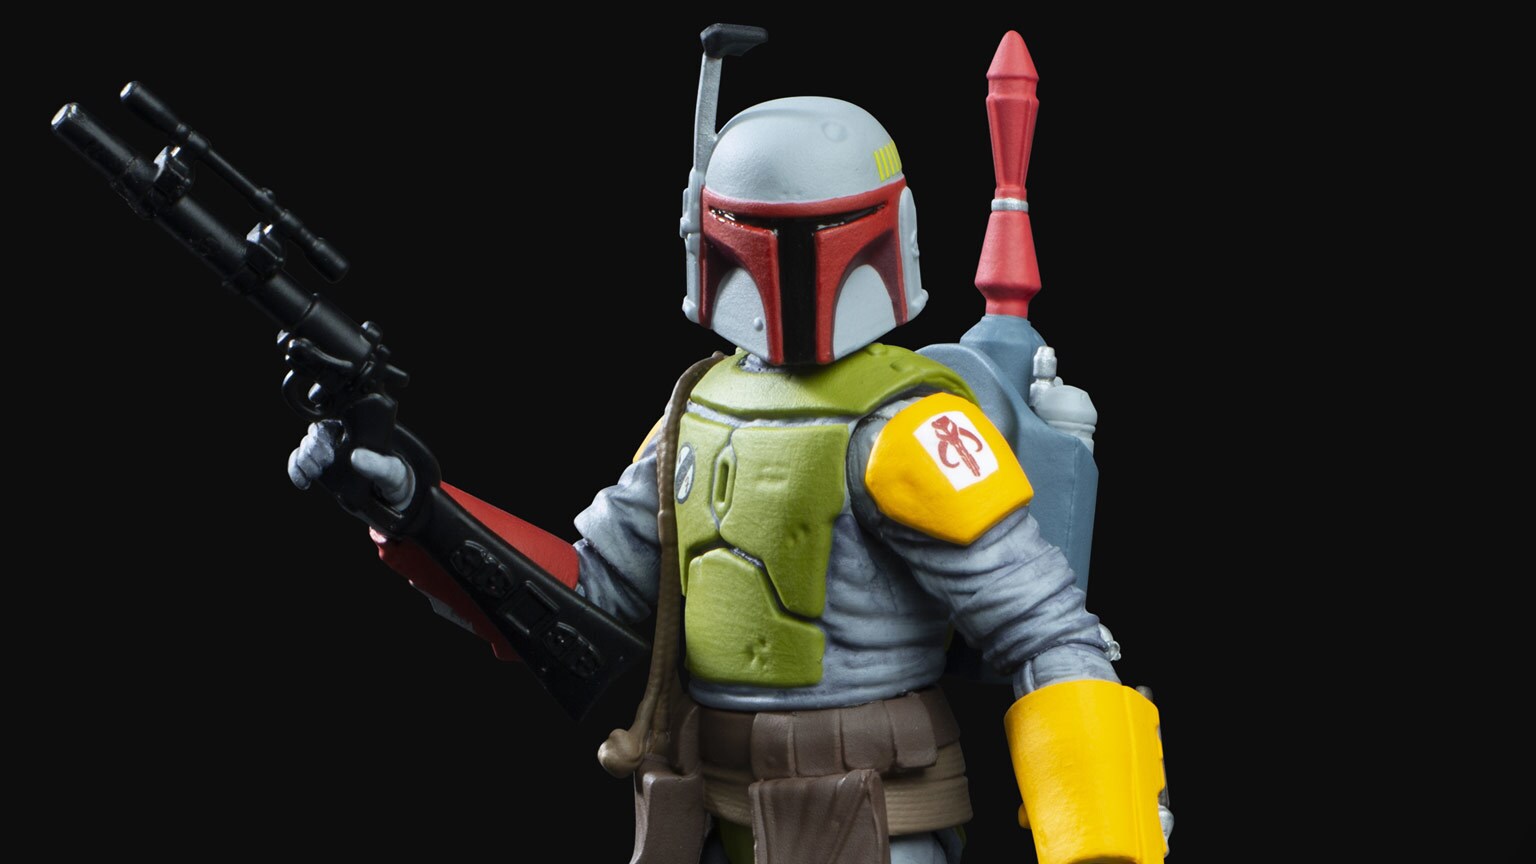 See a Galaxy of Star Wars Exclusives Coming to San Diego Comic-Con 2019